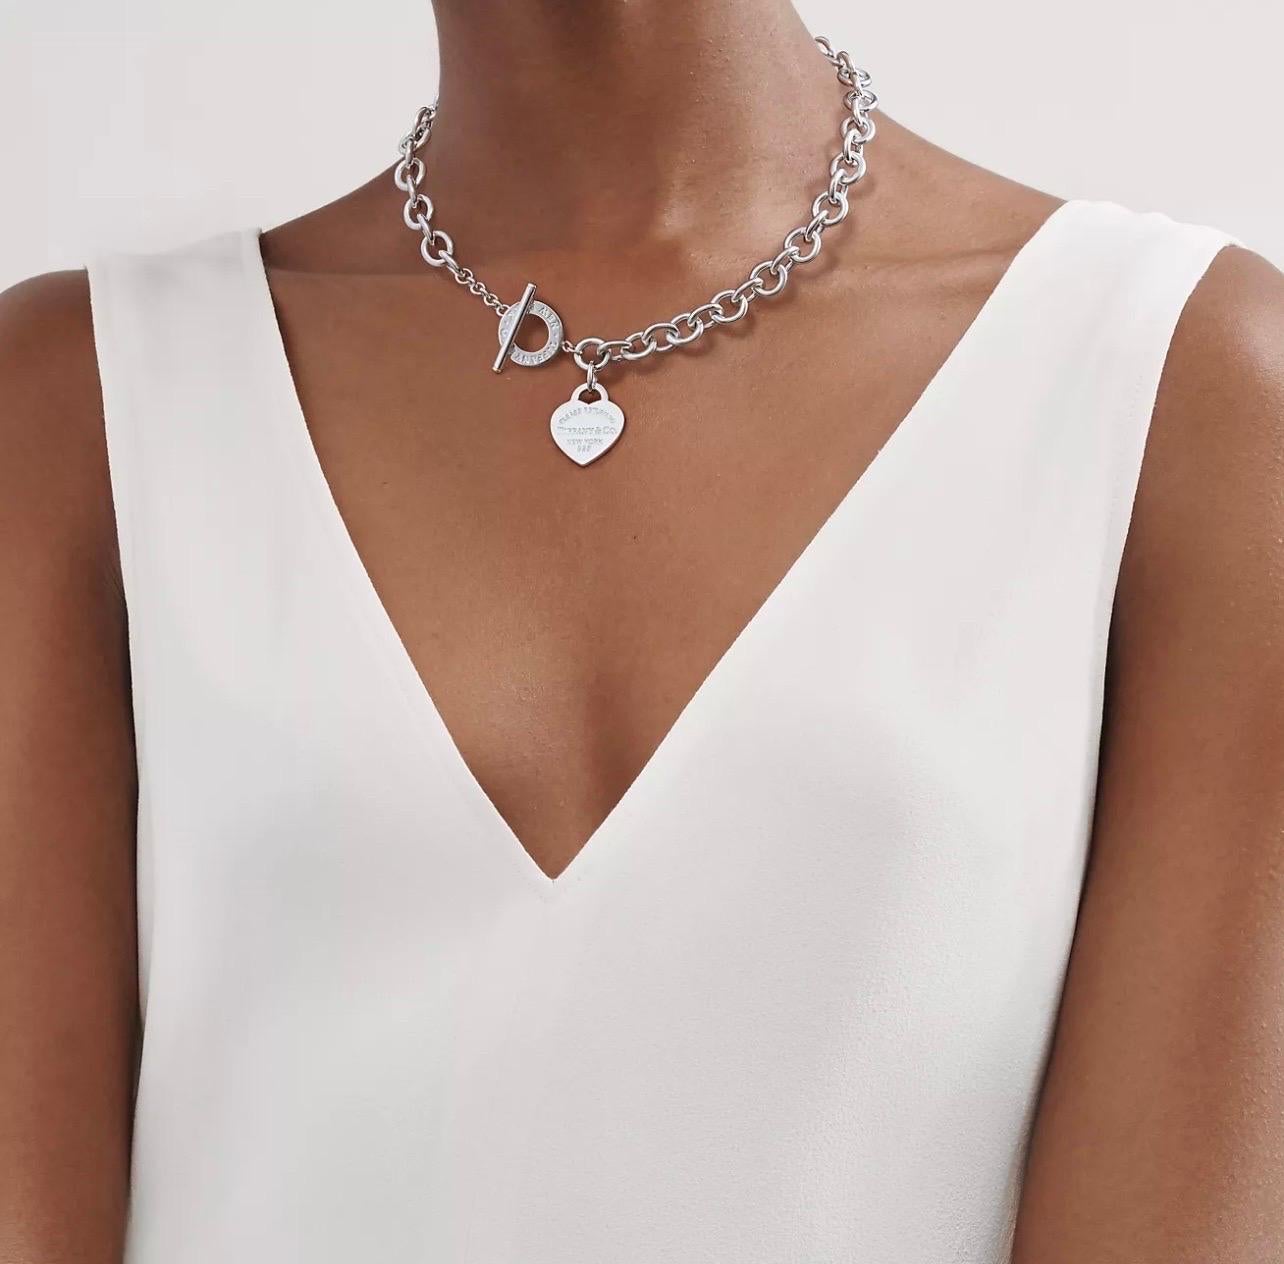 Tiffany & Co. Sterling Silver Heart Tag Toggle Charm Necklace Tiffany & Co. Box, 75 Grams
An elite authentic bracelet from Tiffany & Co., forged from silver with a fine polished finish, it features a sturdy oval chain link bracelet with a solid